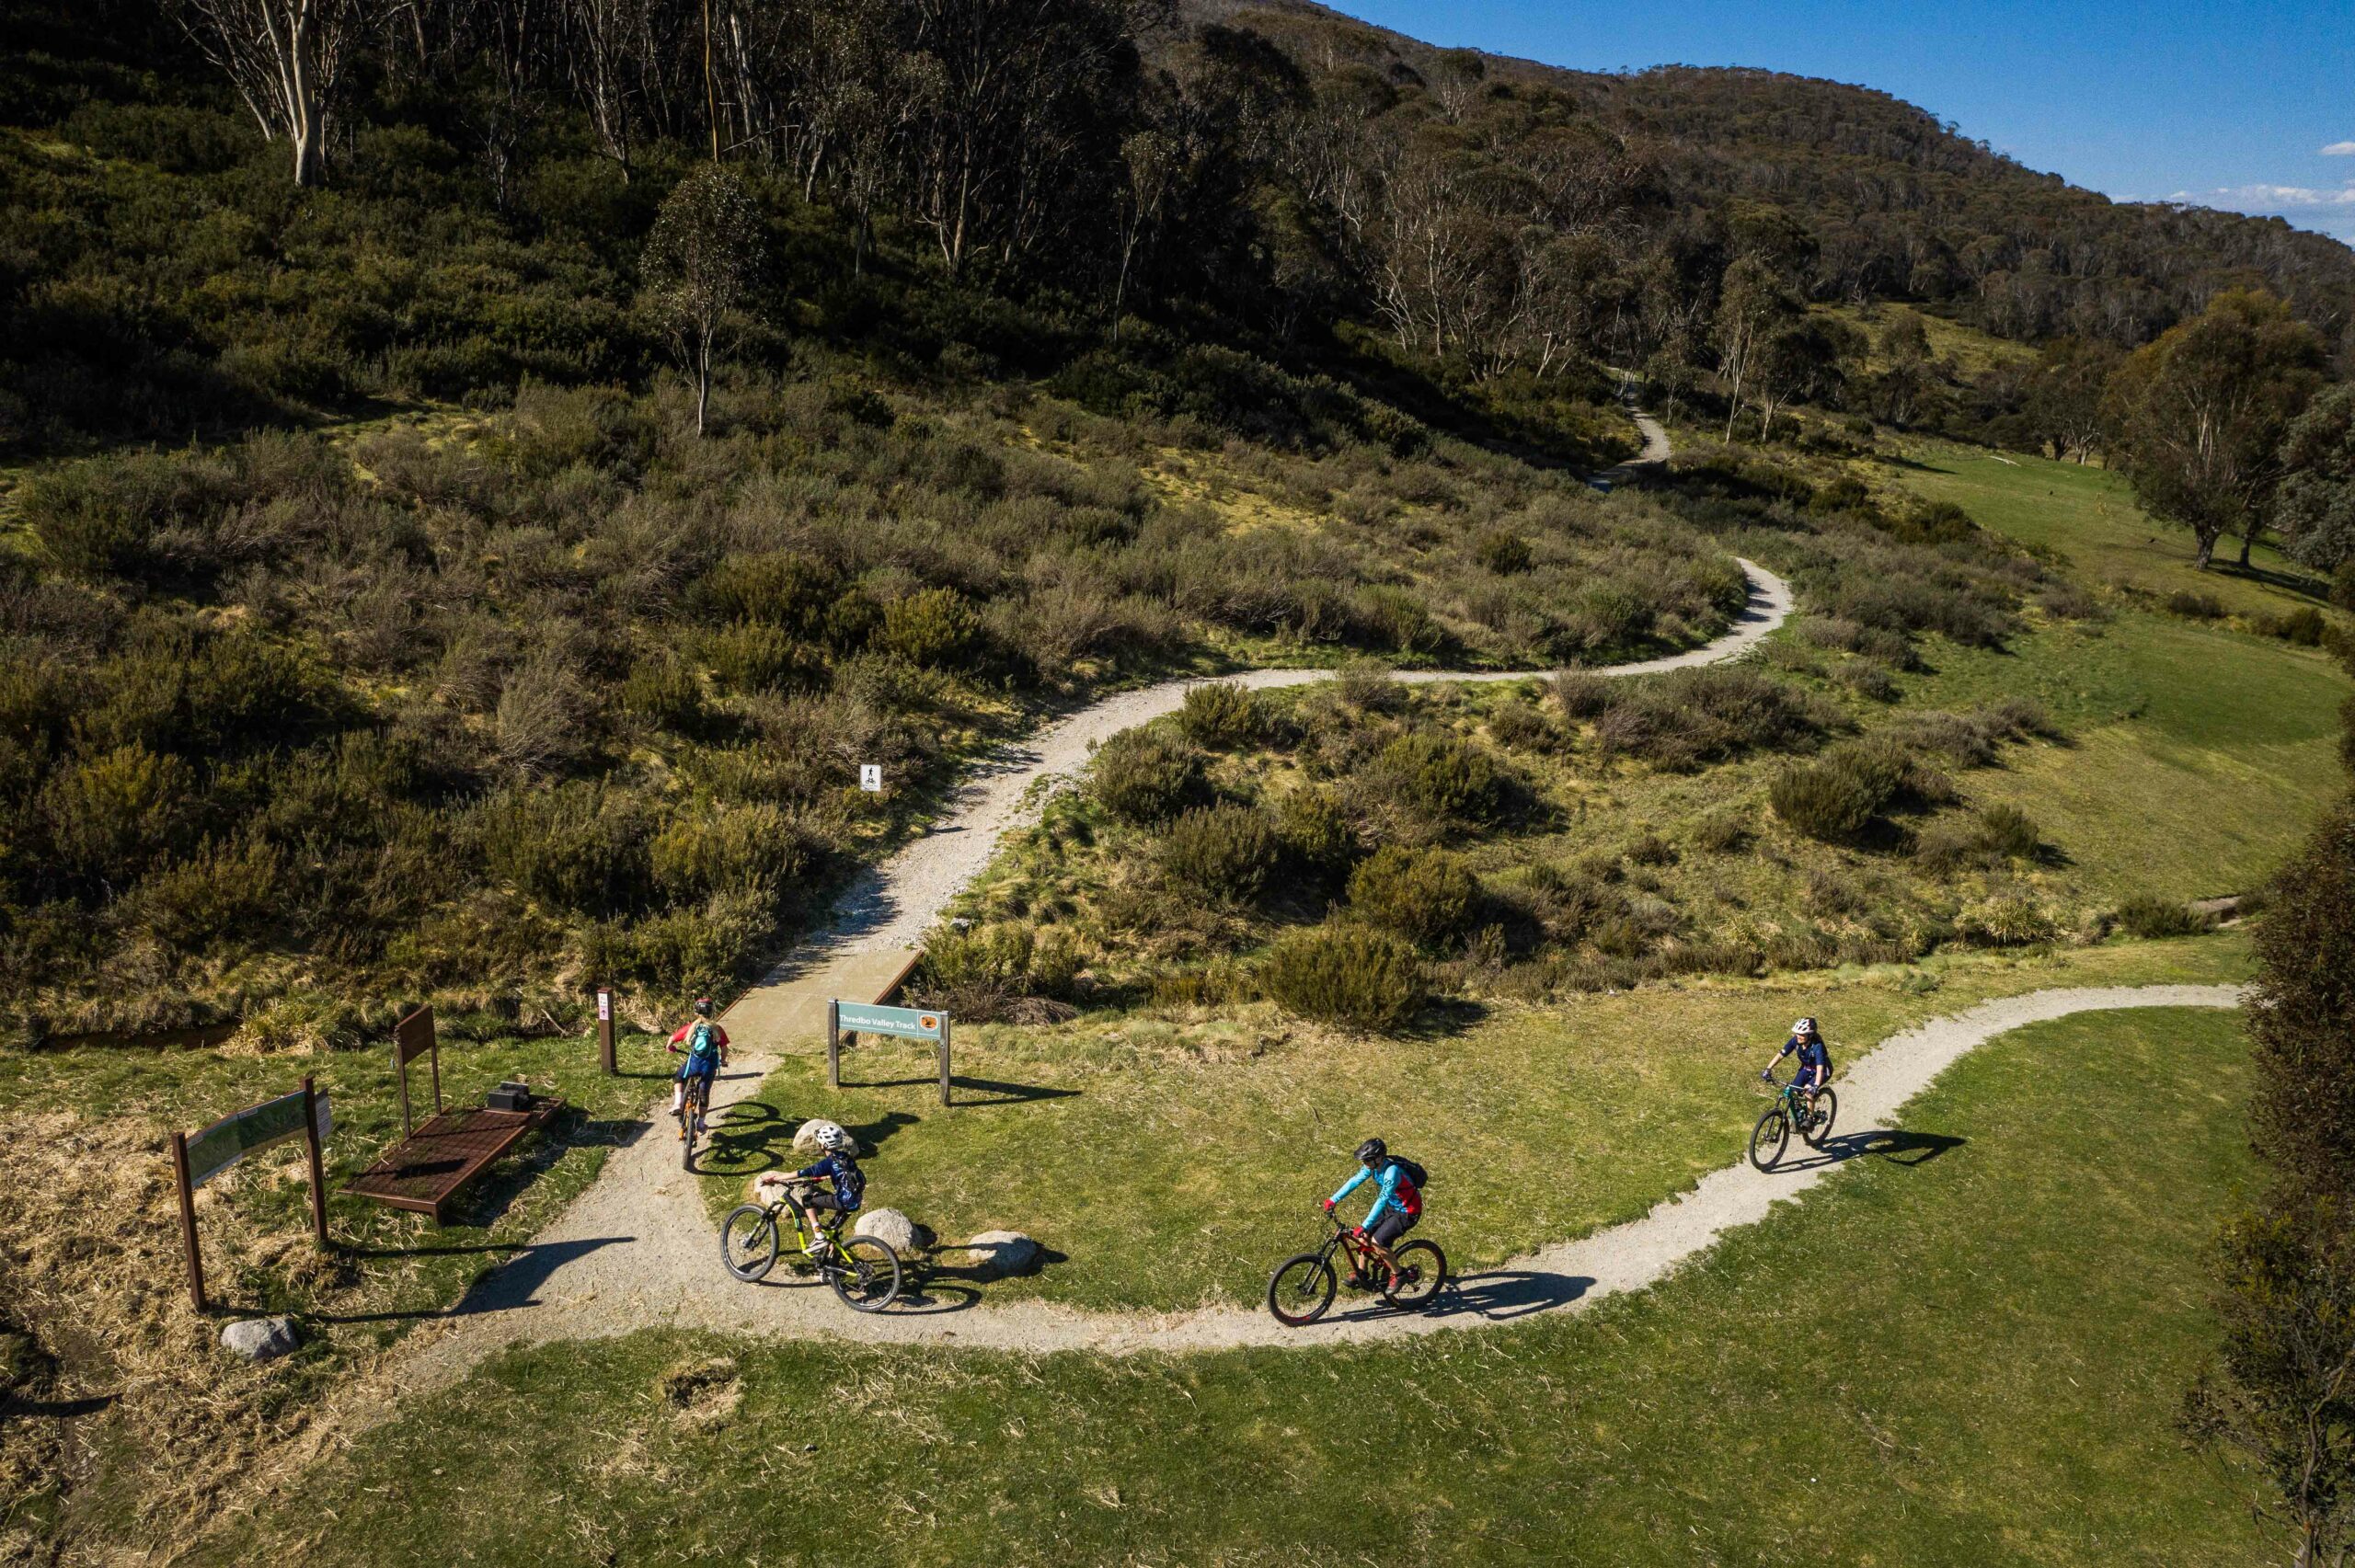 A Group of Riders Take on the Turns of the Thredbo Valley Track